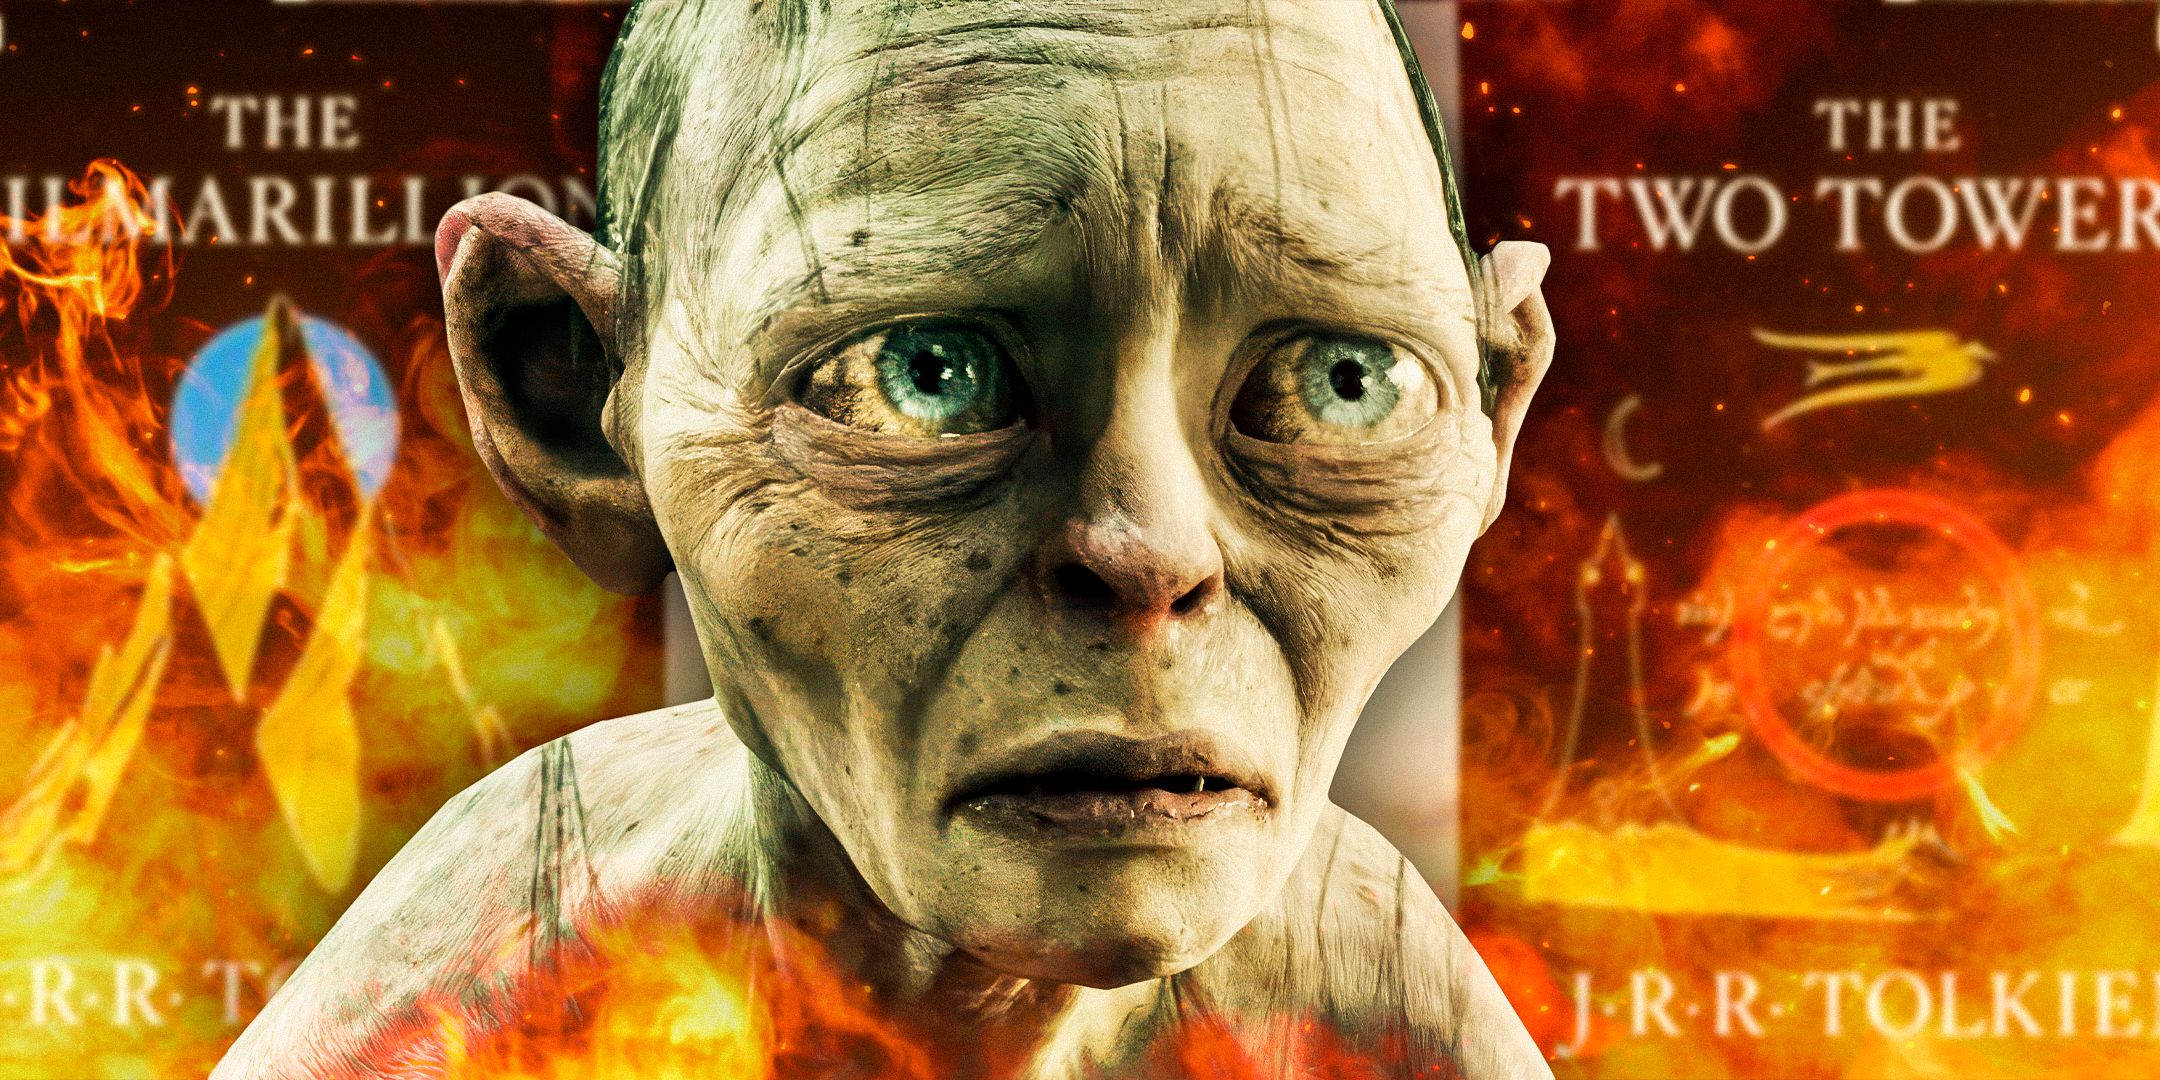 Gollum with the LOTR book covers